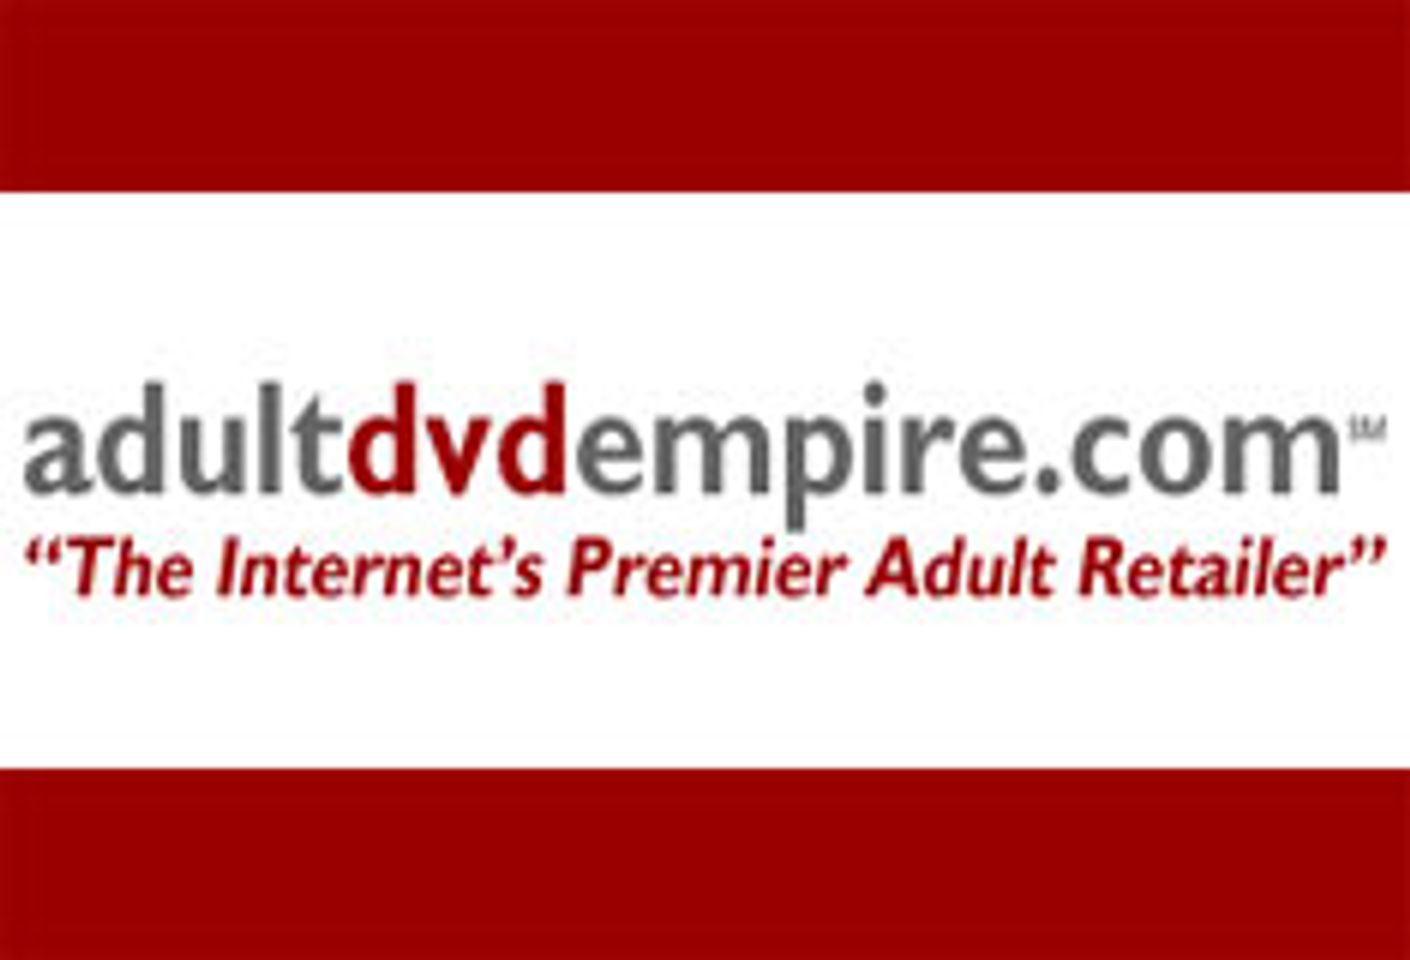 The Empire Hosts First High-Def Adult VoD